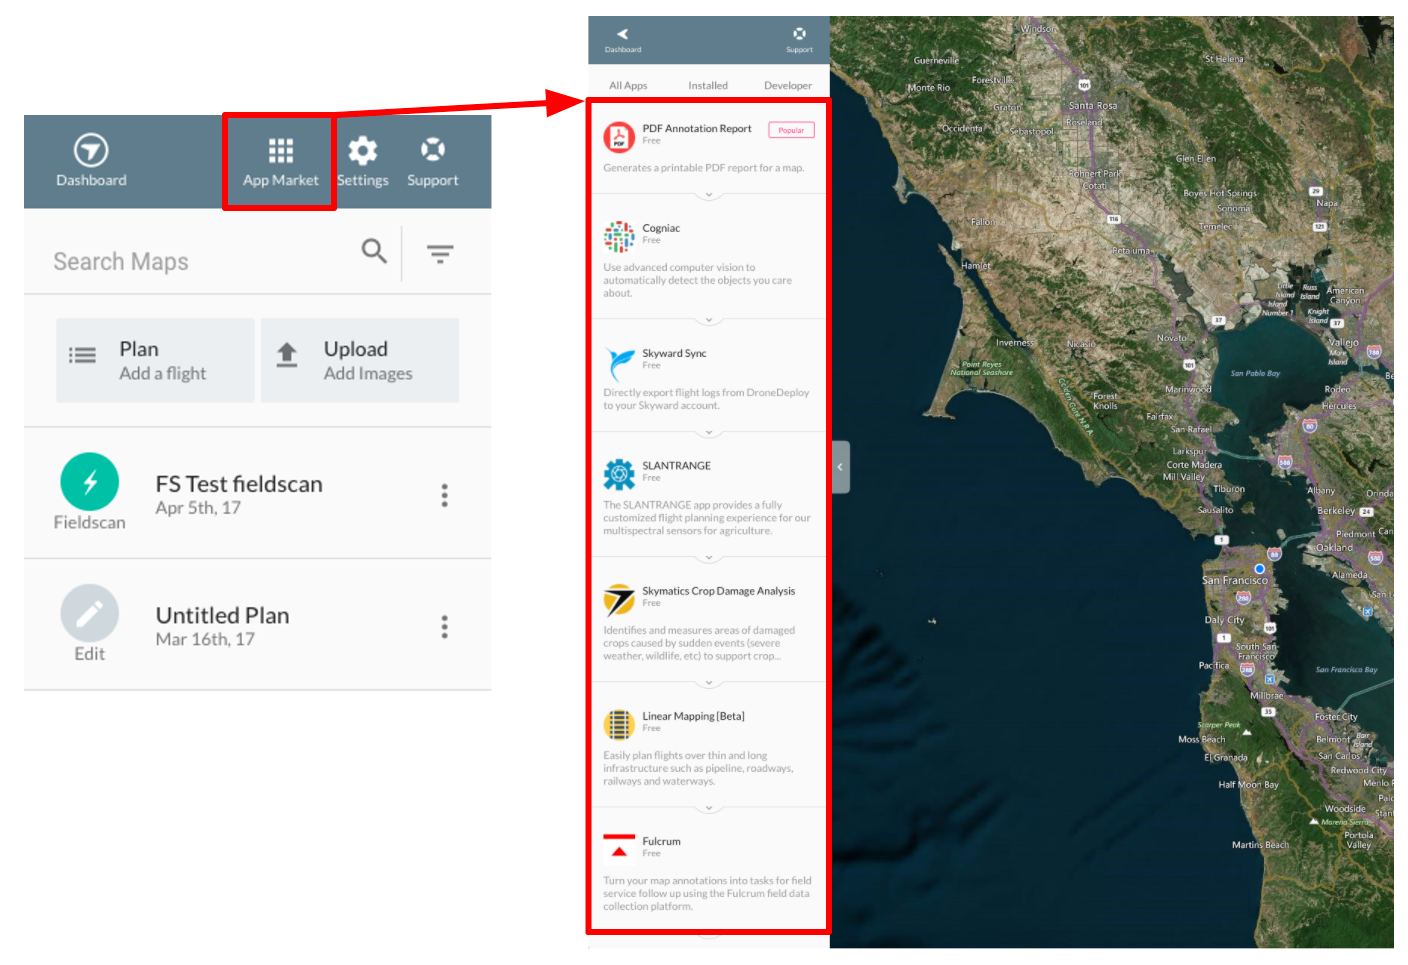 22 New Apps Added to the DroneDeploy App Market - DroneDeploy's Blog